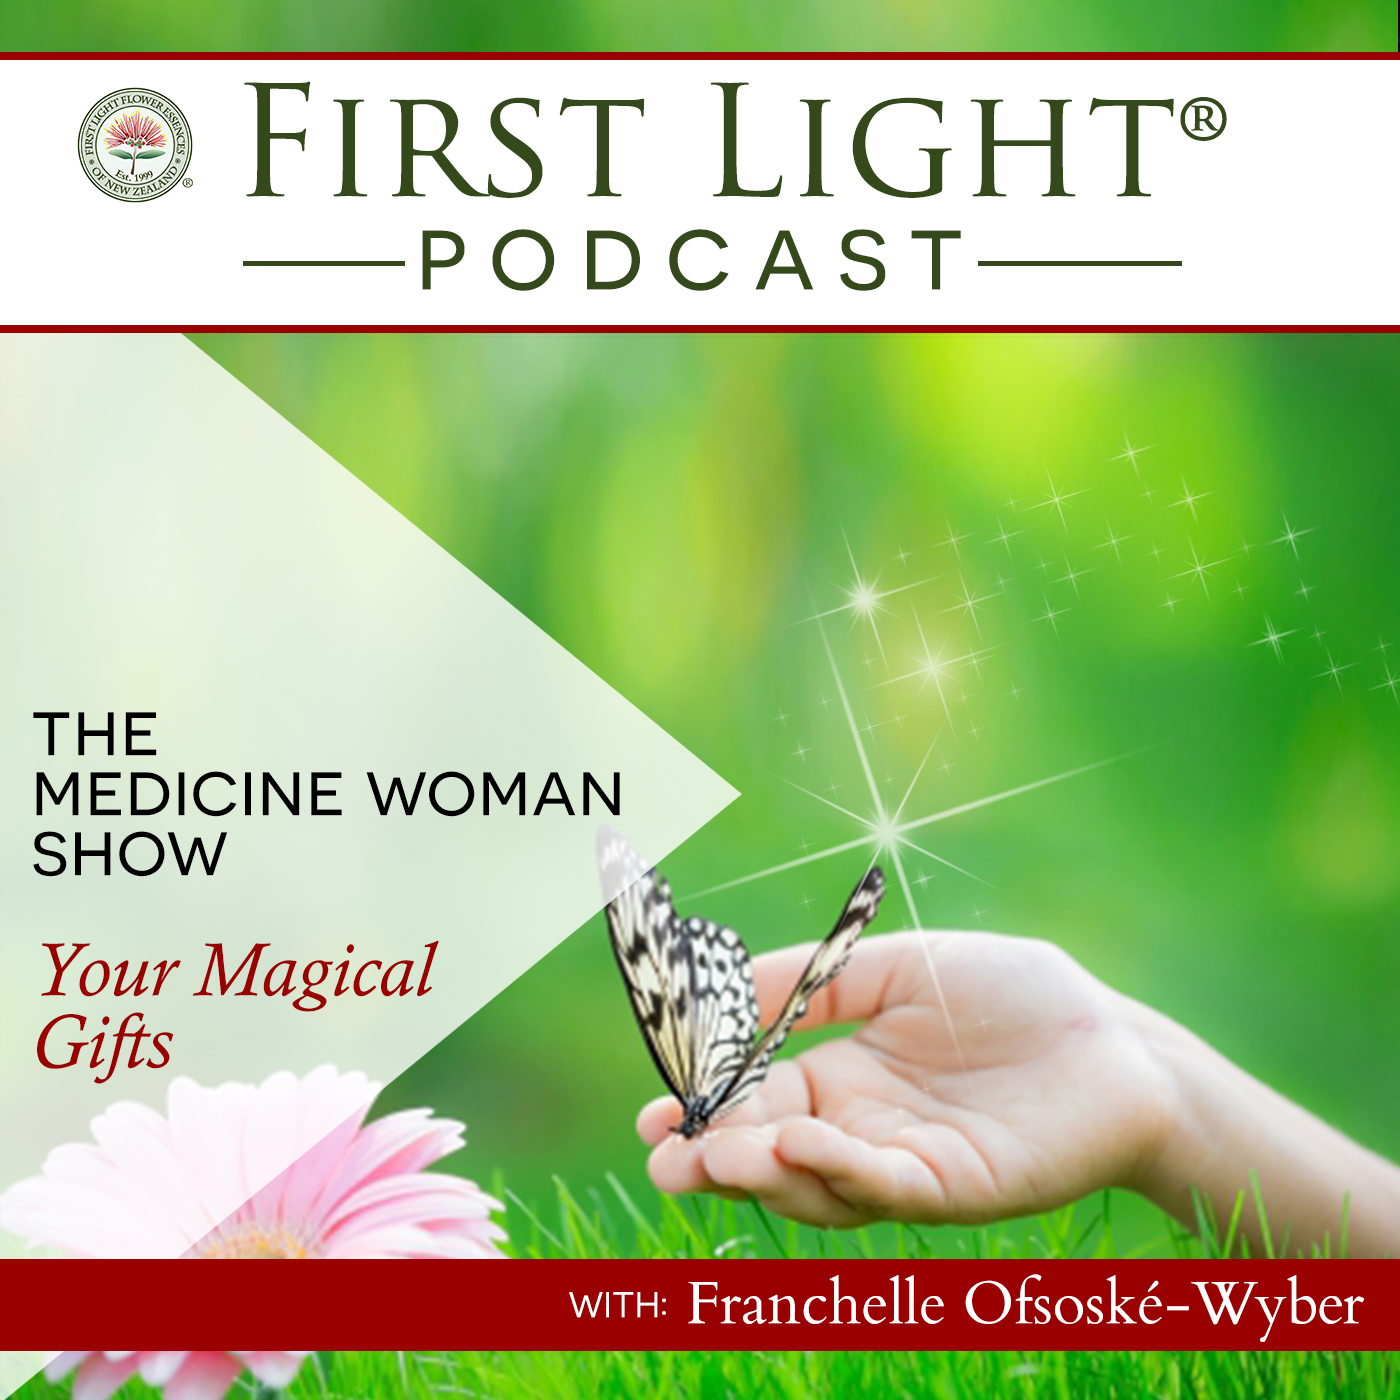 The Medicine Woman Show - Your Magical Gifts